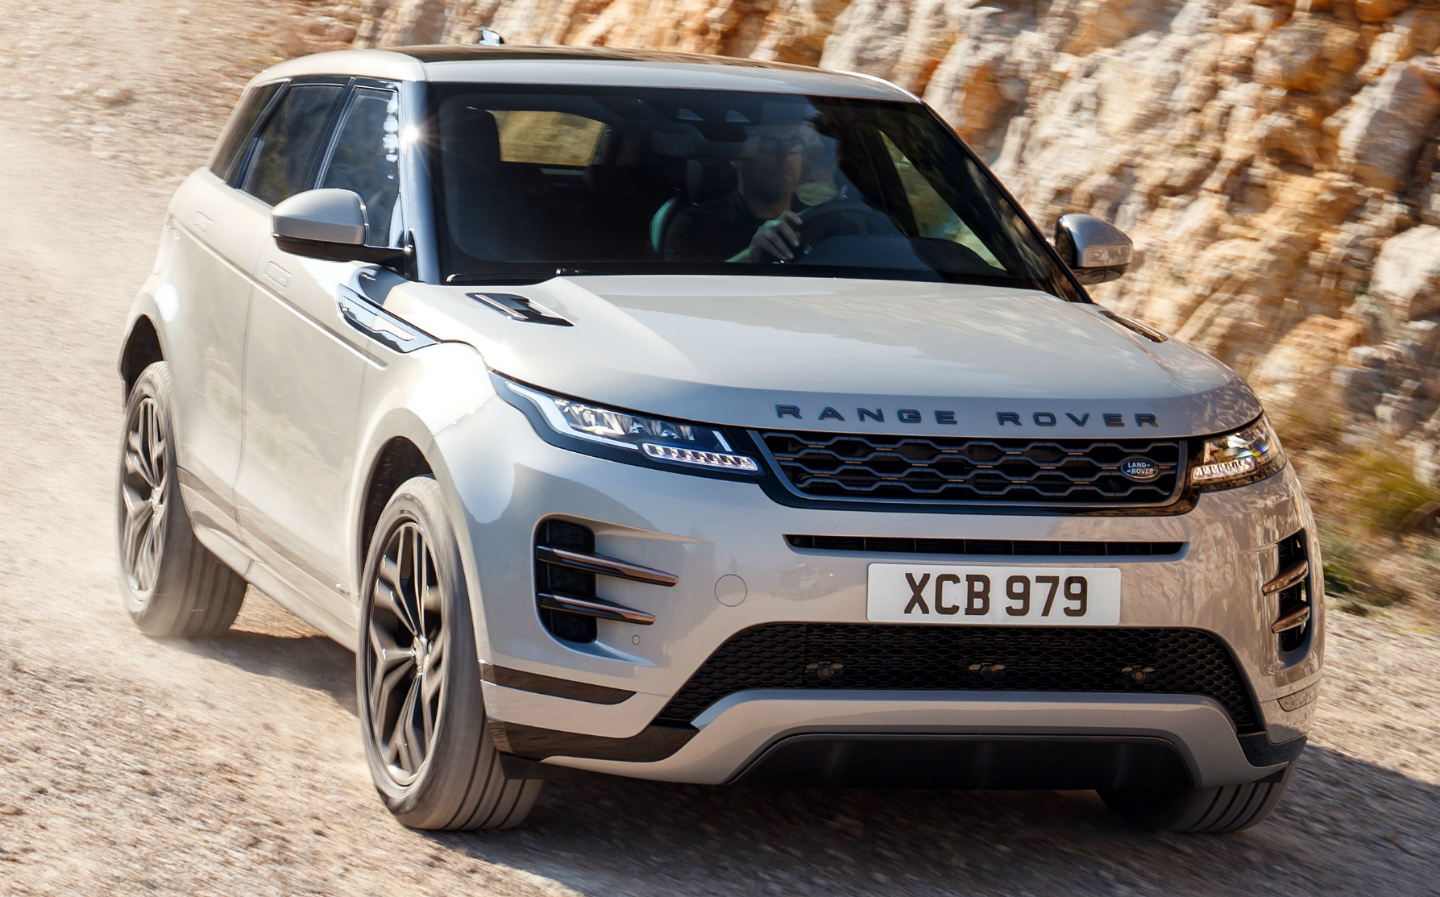 Sunday Times Motor Awards 2019 Best British-Built Car of the Year. Land Rover Range Rover Evoque